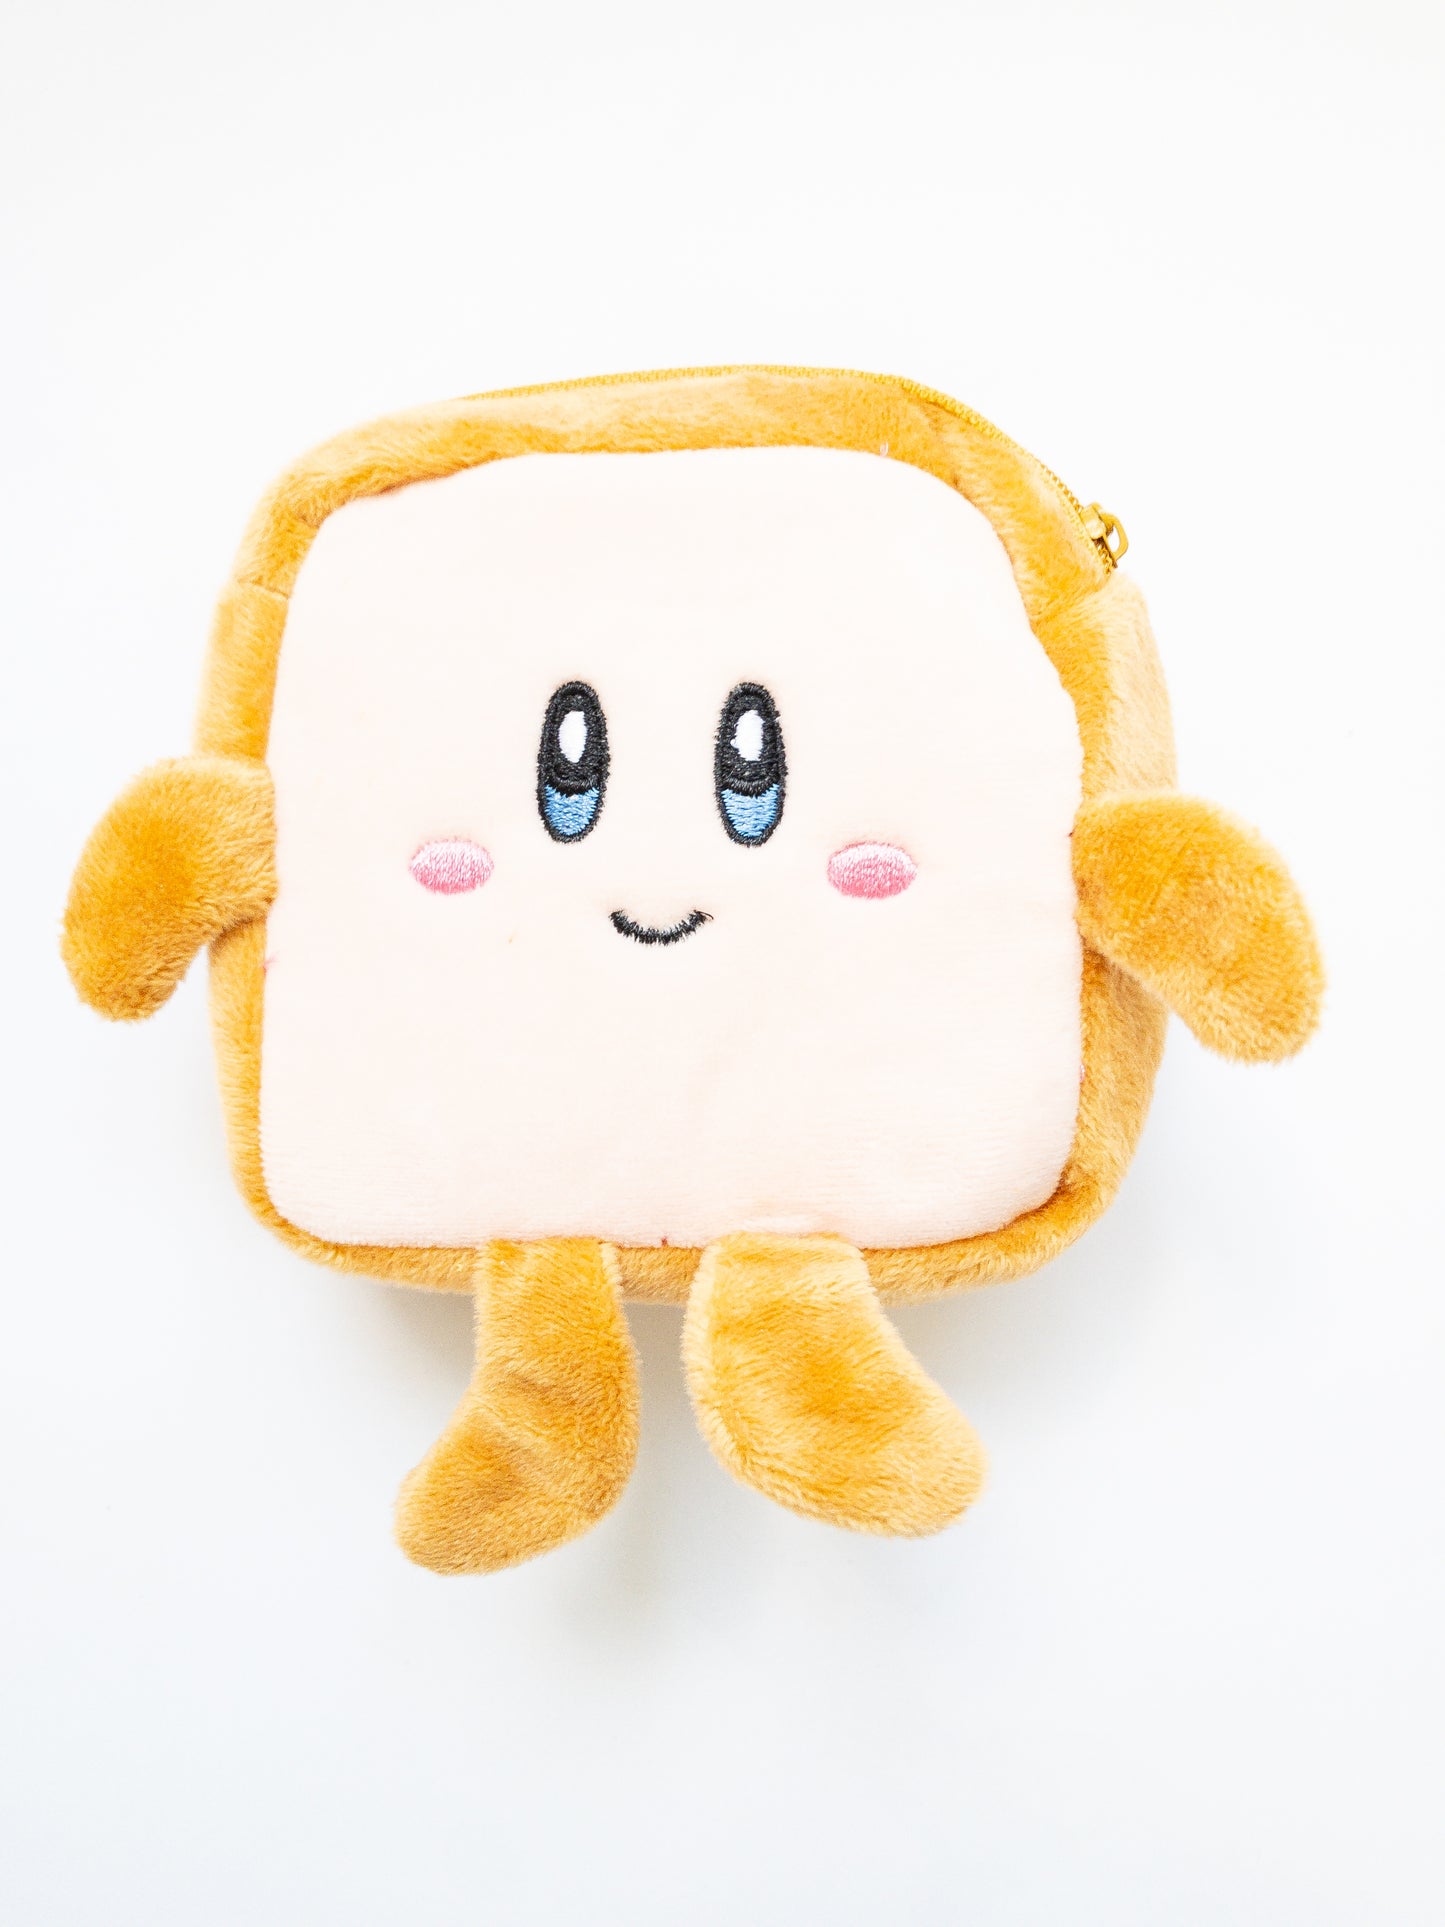 The sweetest dessert treat to hold your coins and chapstick! This Brick Toast Coin Purse doubles as a keychain and is small enough to attach to your purse or backpack and yet big enough to carry your essentials. It fits credit cards, chapsticks, coins, and more!